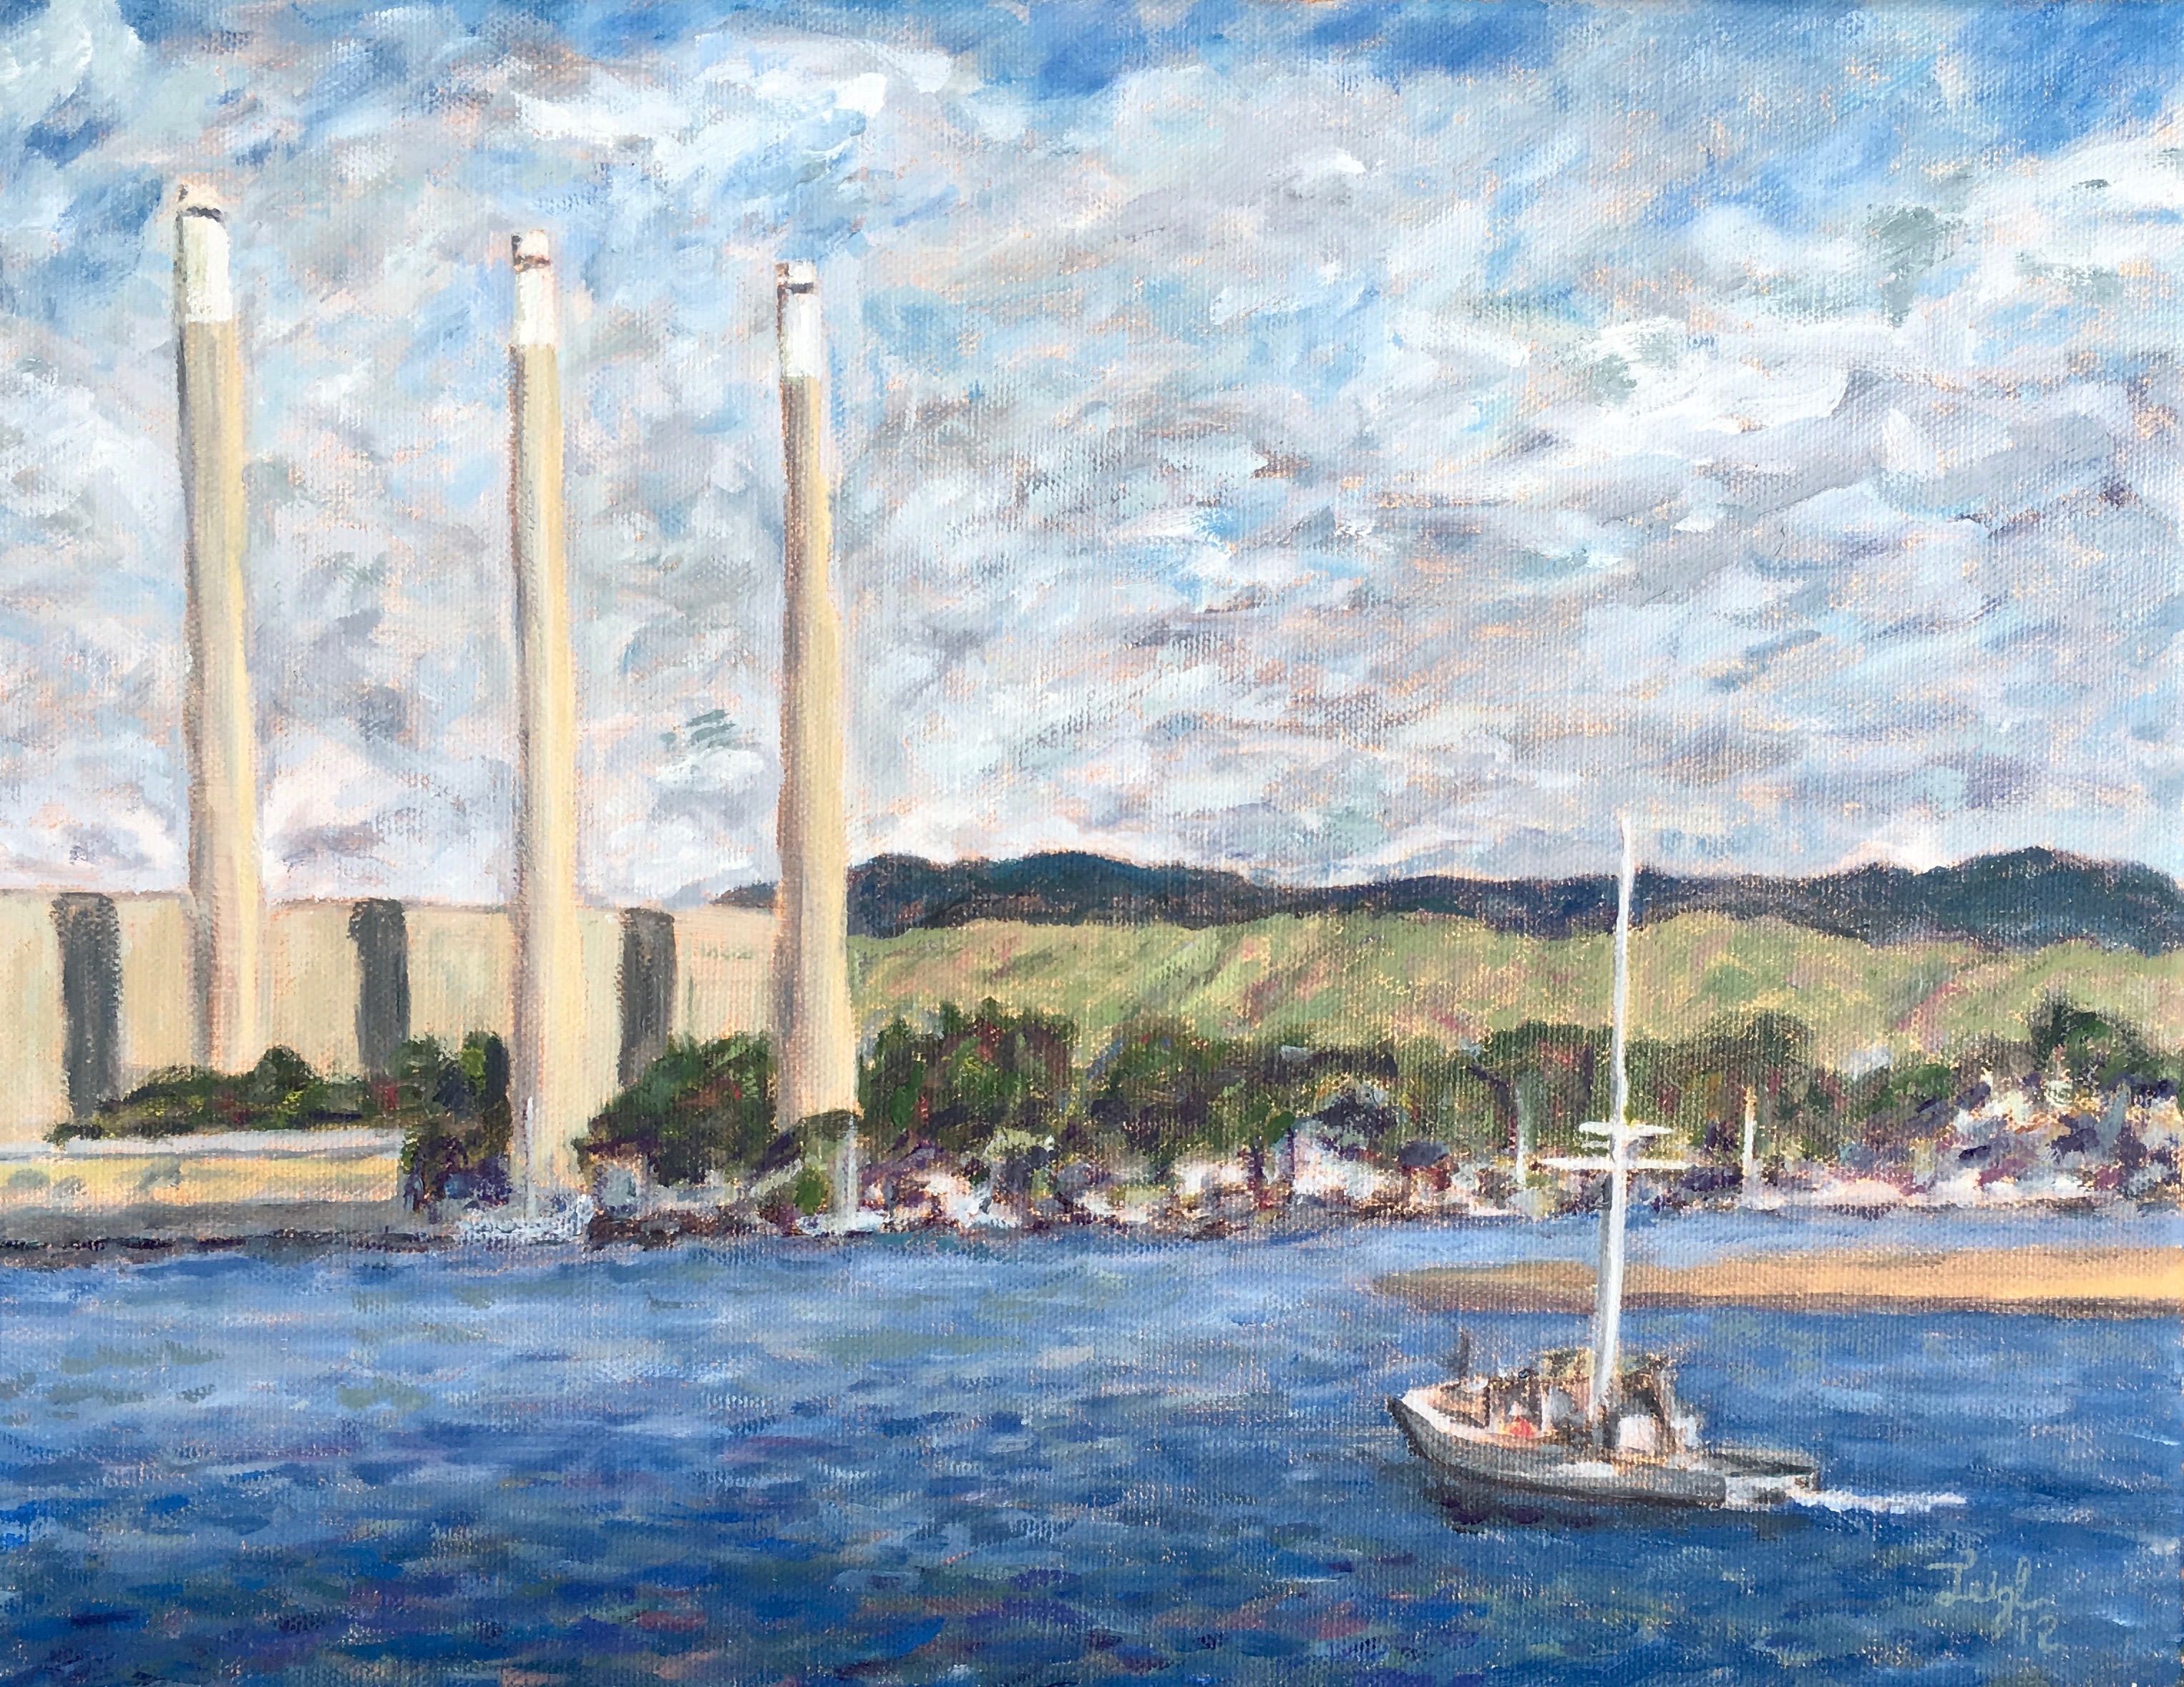 Coming into MB Harbor  ~  
2012  •  14 x 11